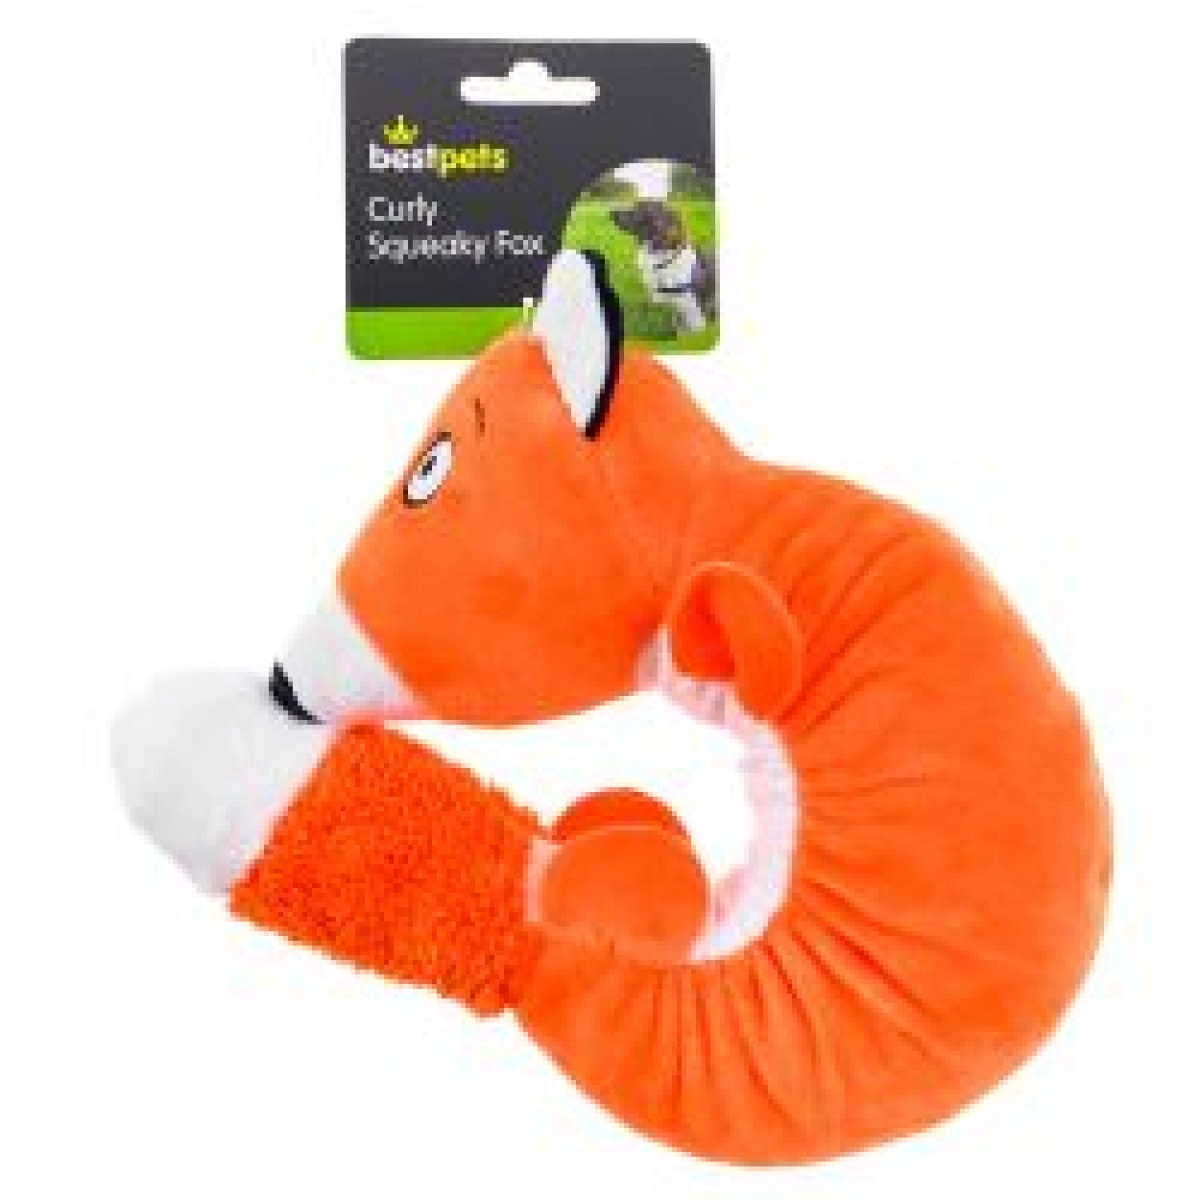 Curly Squeaky Fox – Pawfect Supplies Ltd Product Image